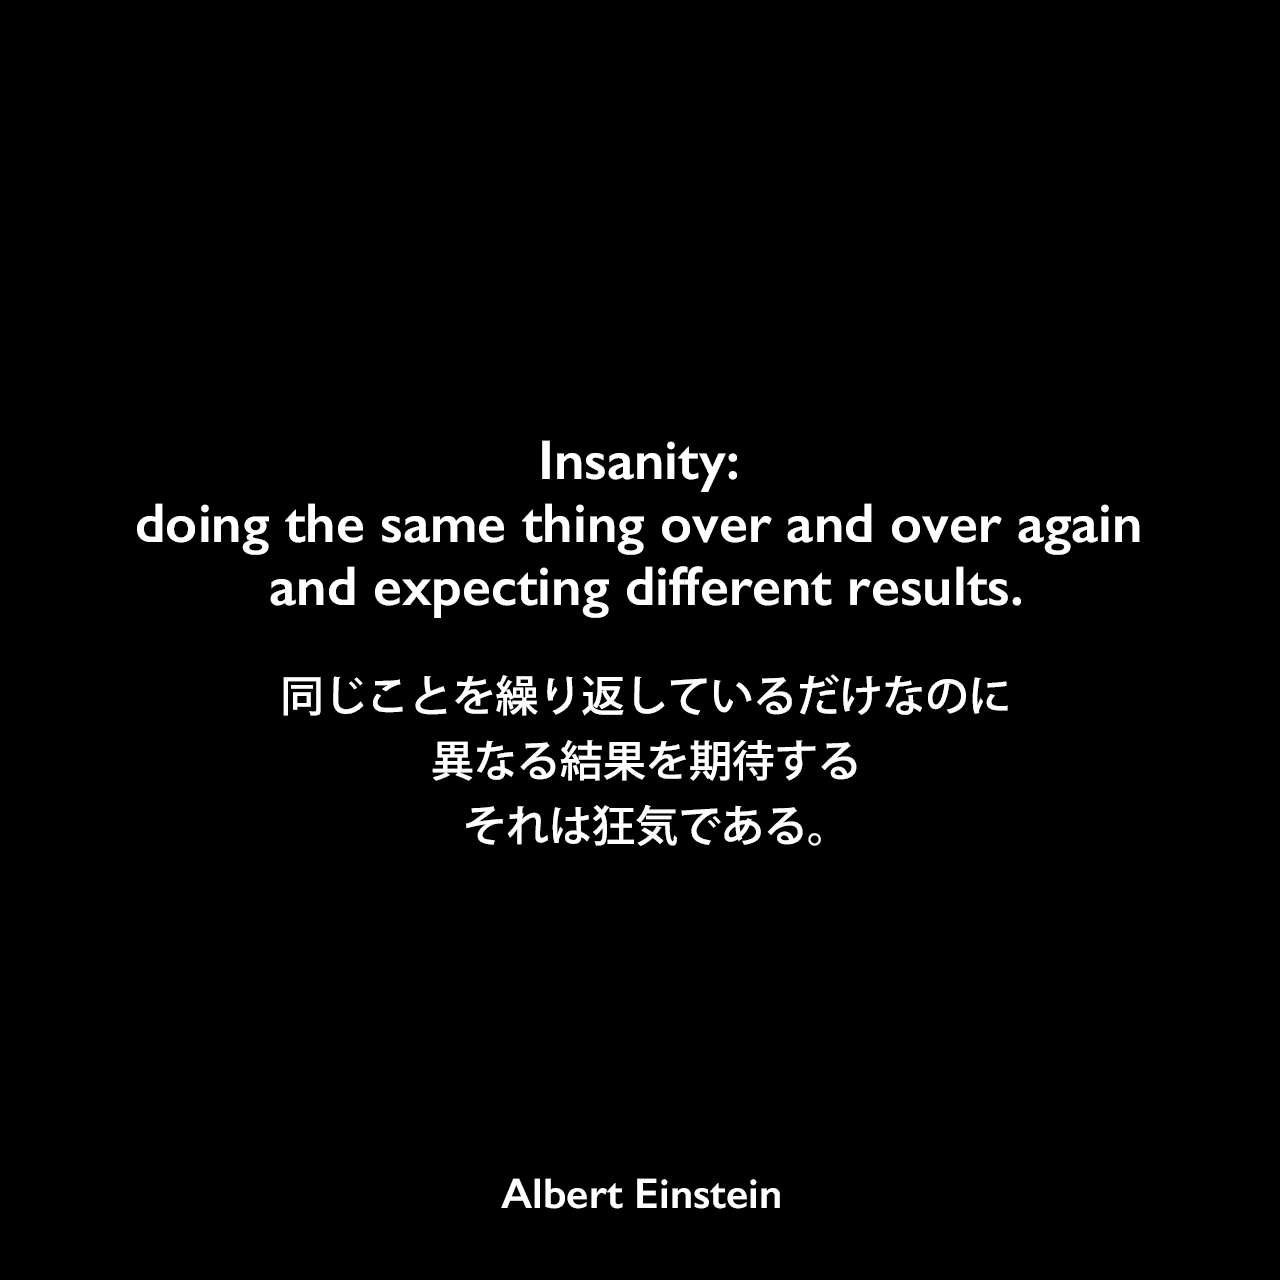 Insanity: doing the same thing over and over again and expecting different results.同じことを繰り返しているだけなのに、異なる結果を期待する、それは狂気である。Albert Einstein